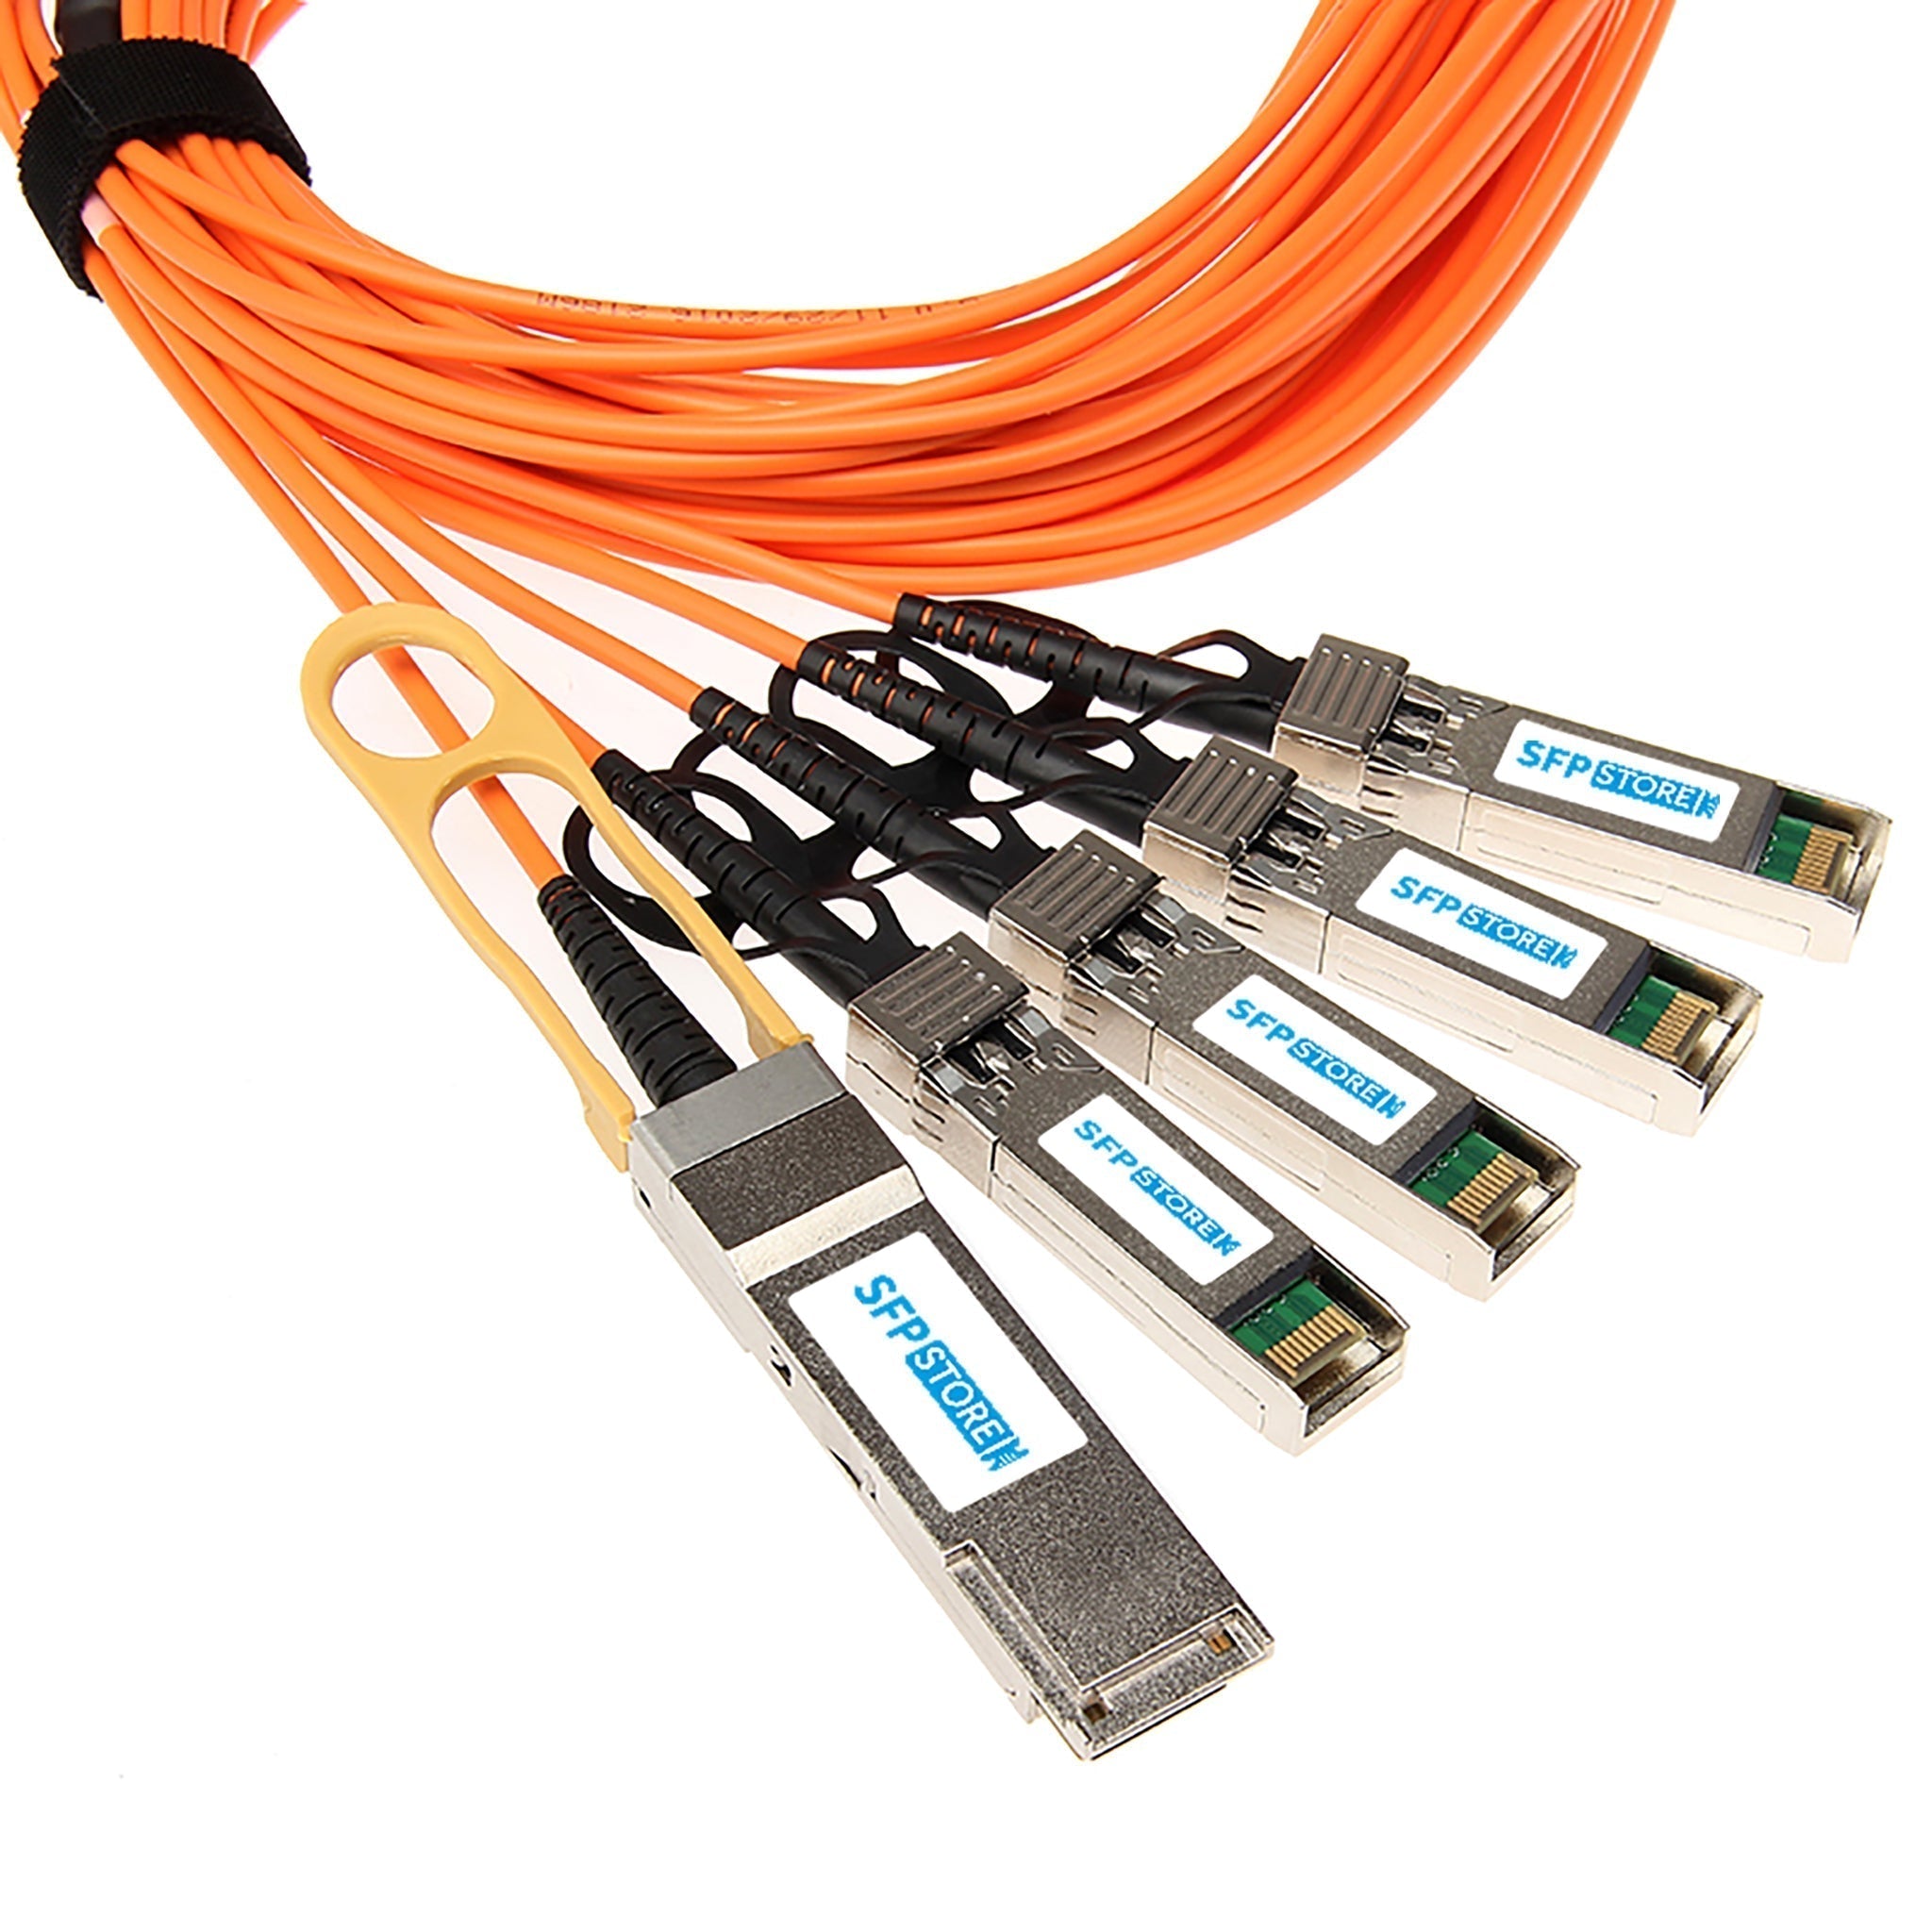 40G-QSFP-4SFP-AOC-1001-C - 10m Brocade/Ruckus Compatible 40G QSFP+ to 4 x 10G SFP+ Active Optical Cable